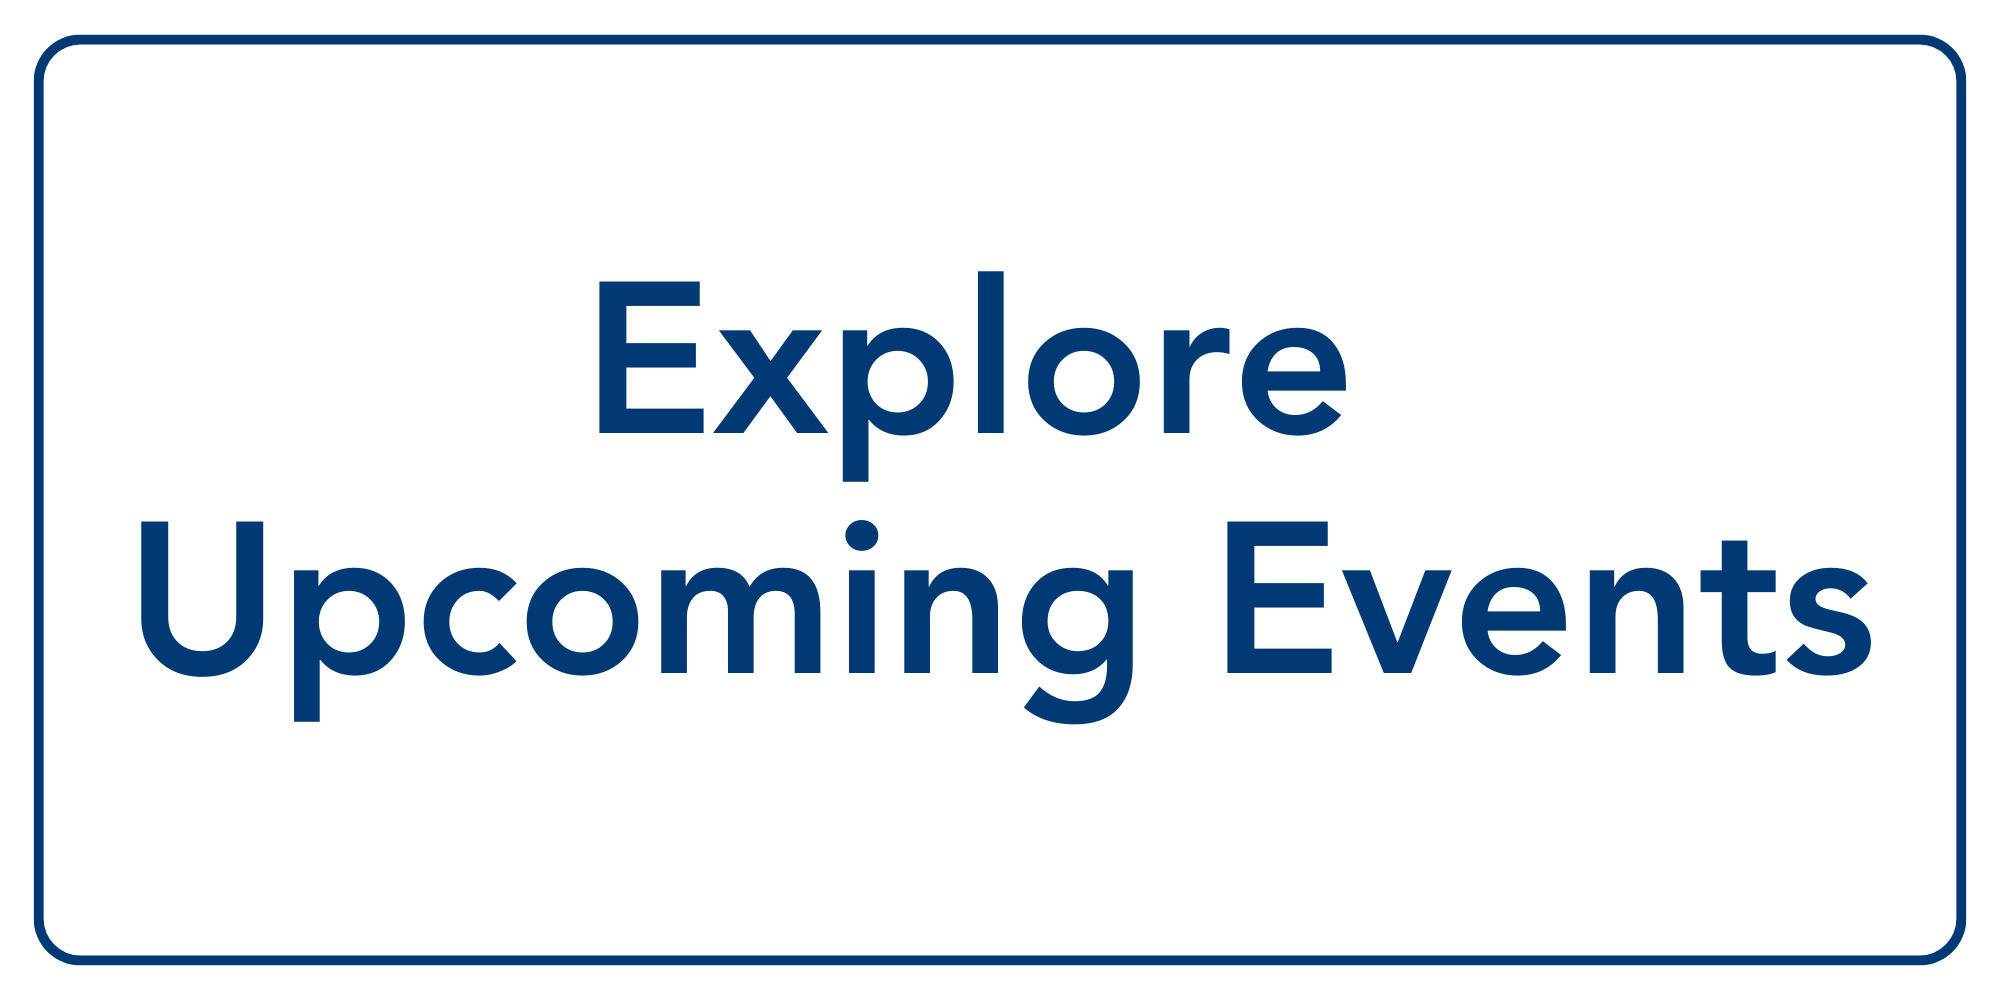 Explore Upcoming Events